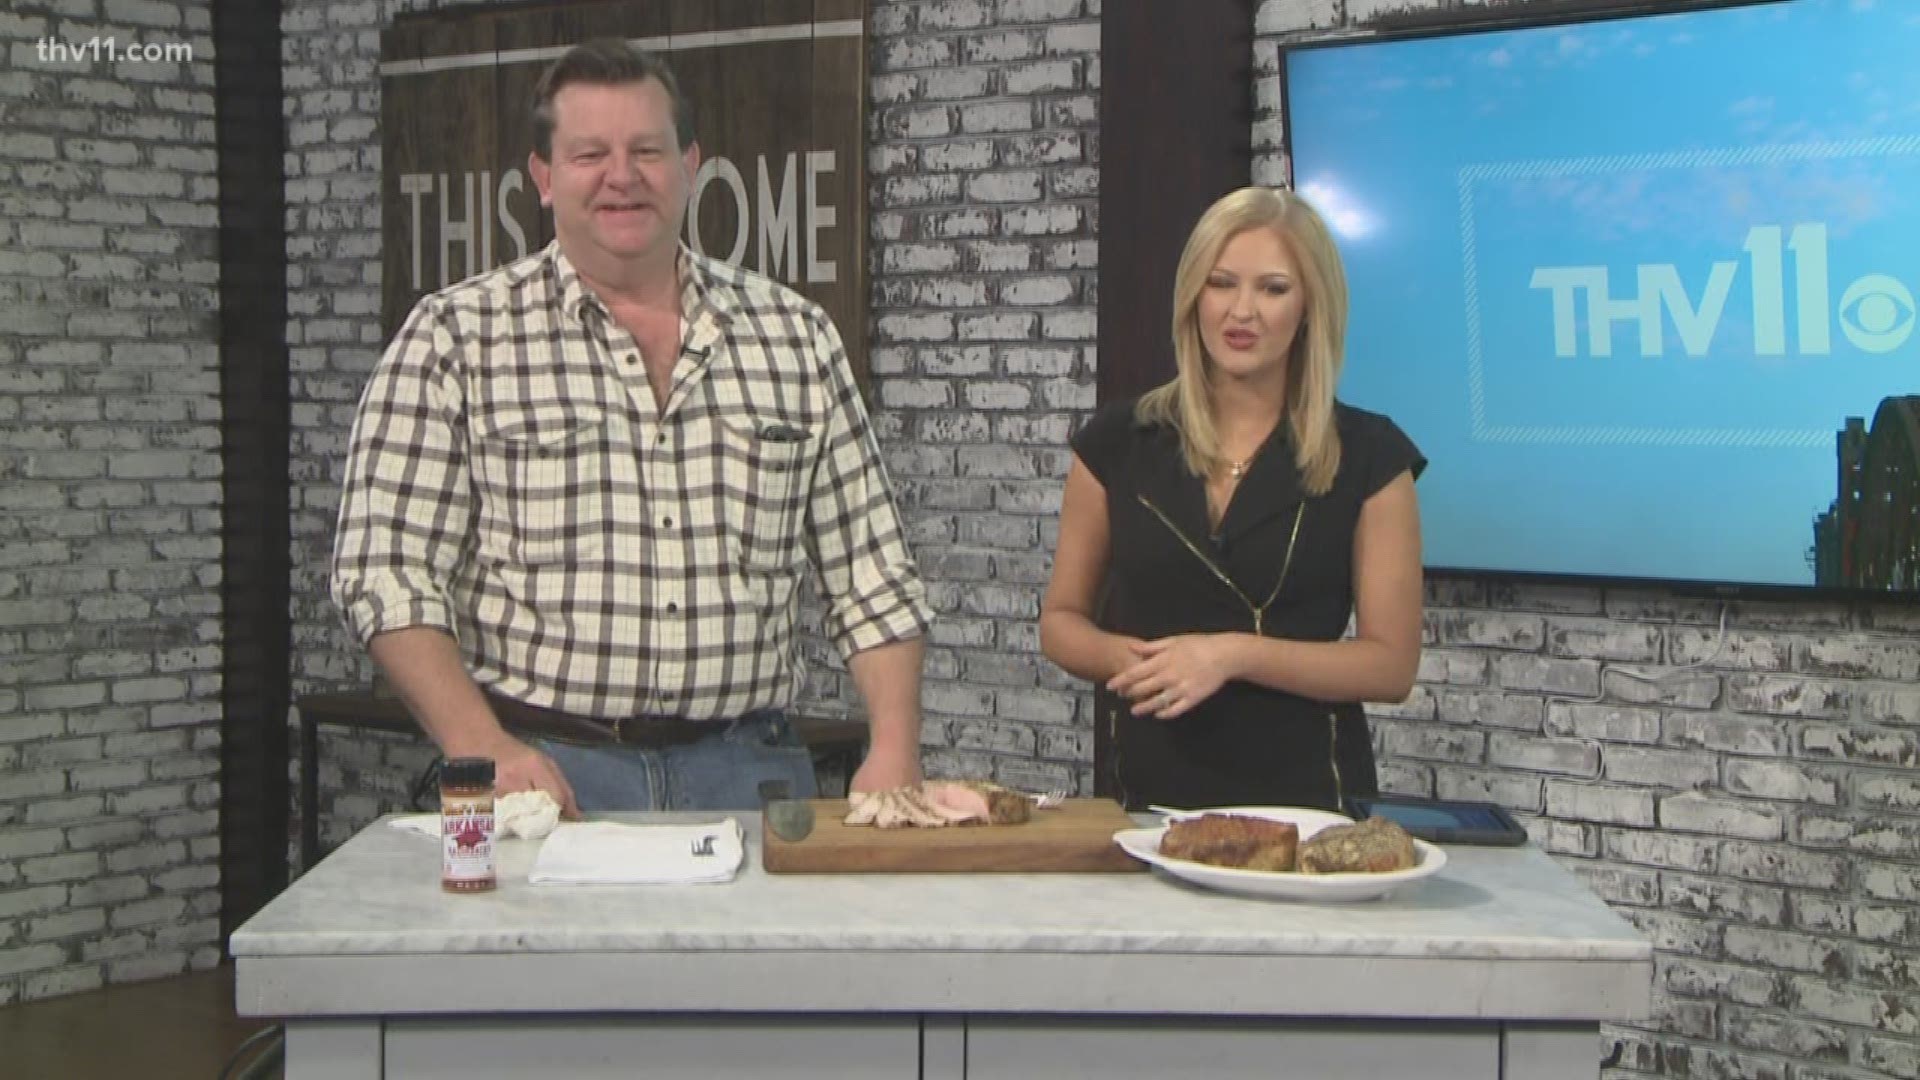 Chef Anthony Michael gives us a recipe for great center-cut chops, based on a good brine he concocted.